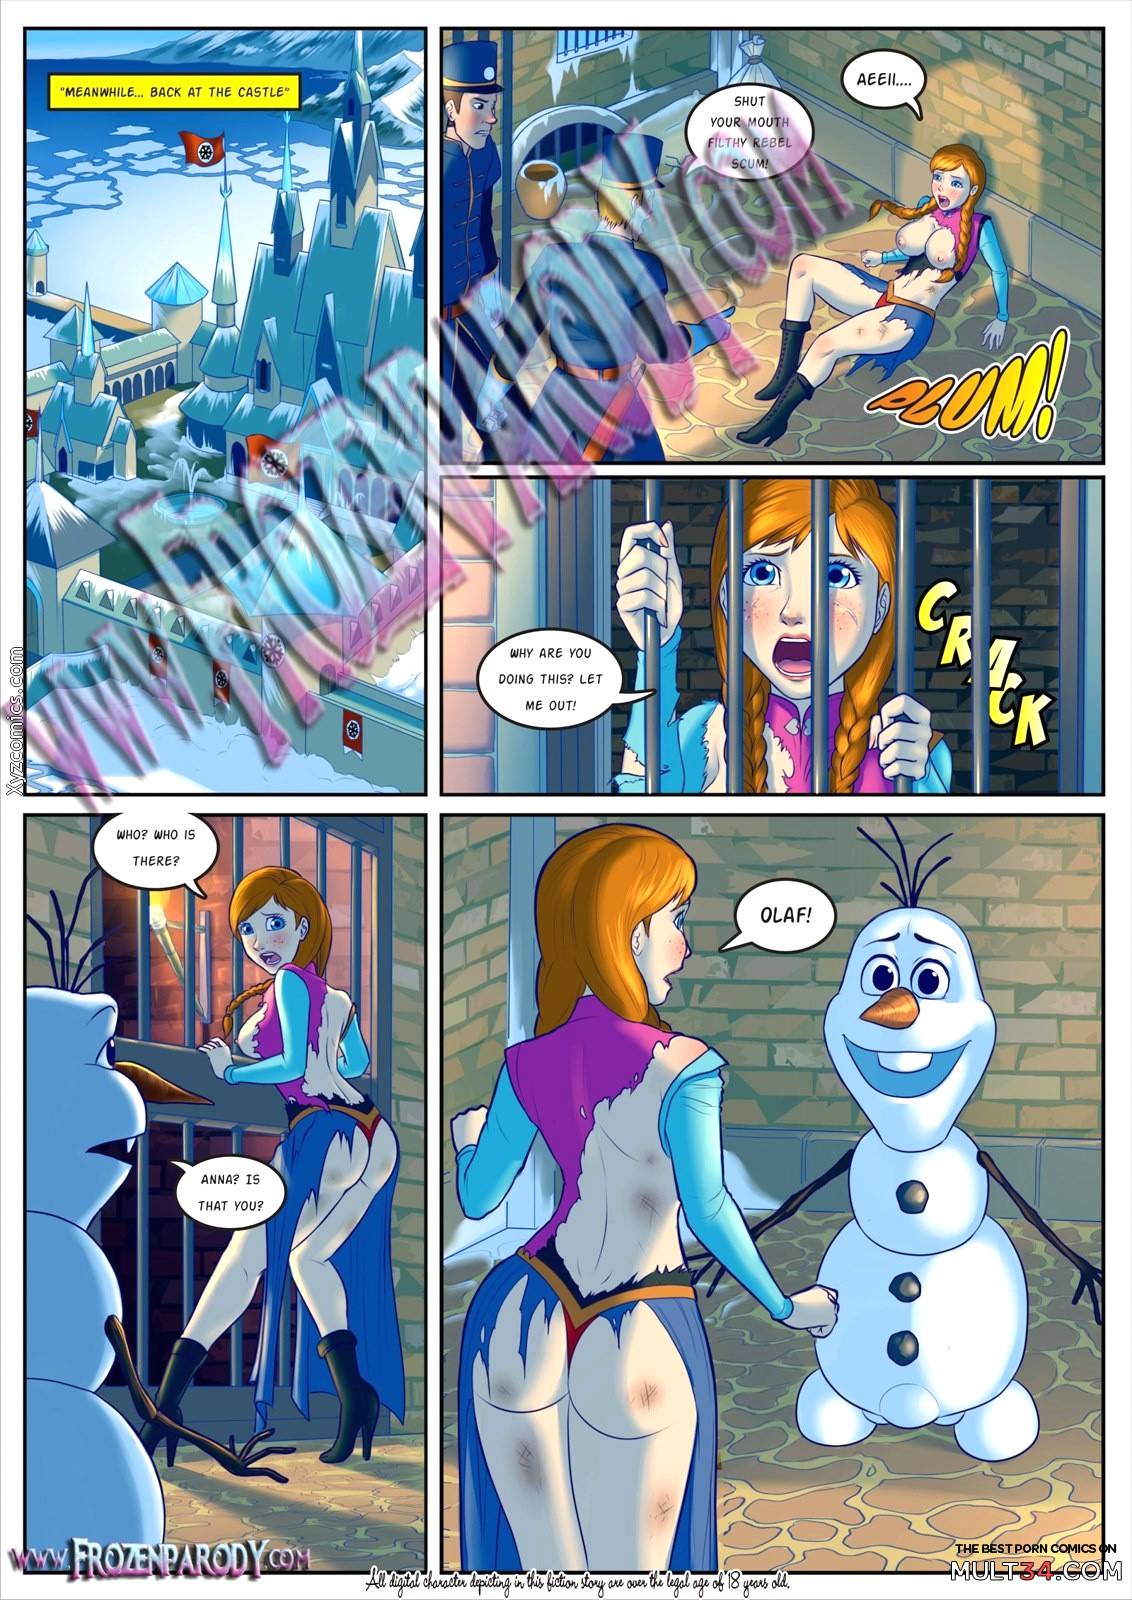 Frozen Parody 1, 2 page 9